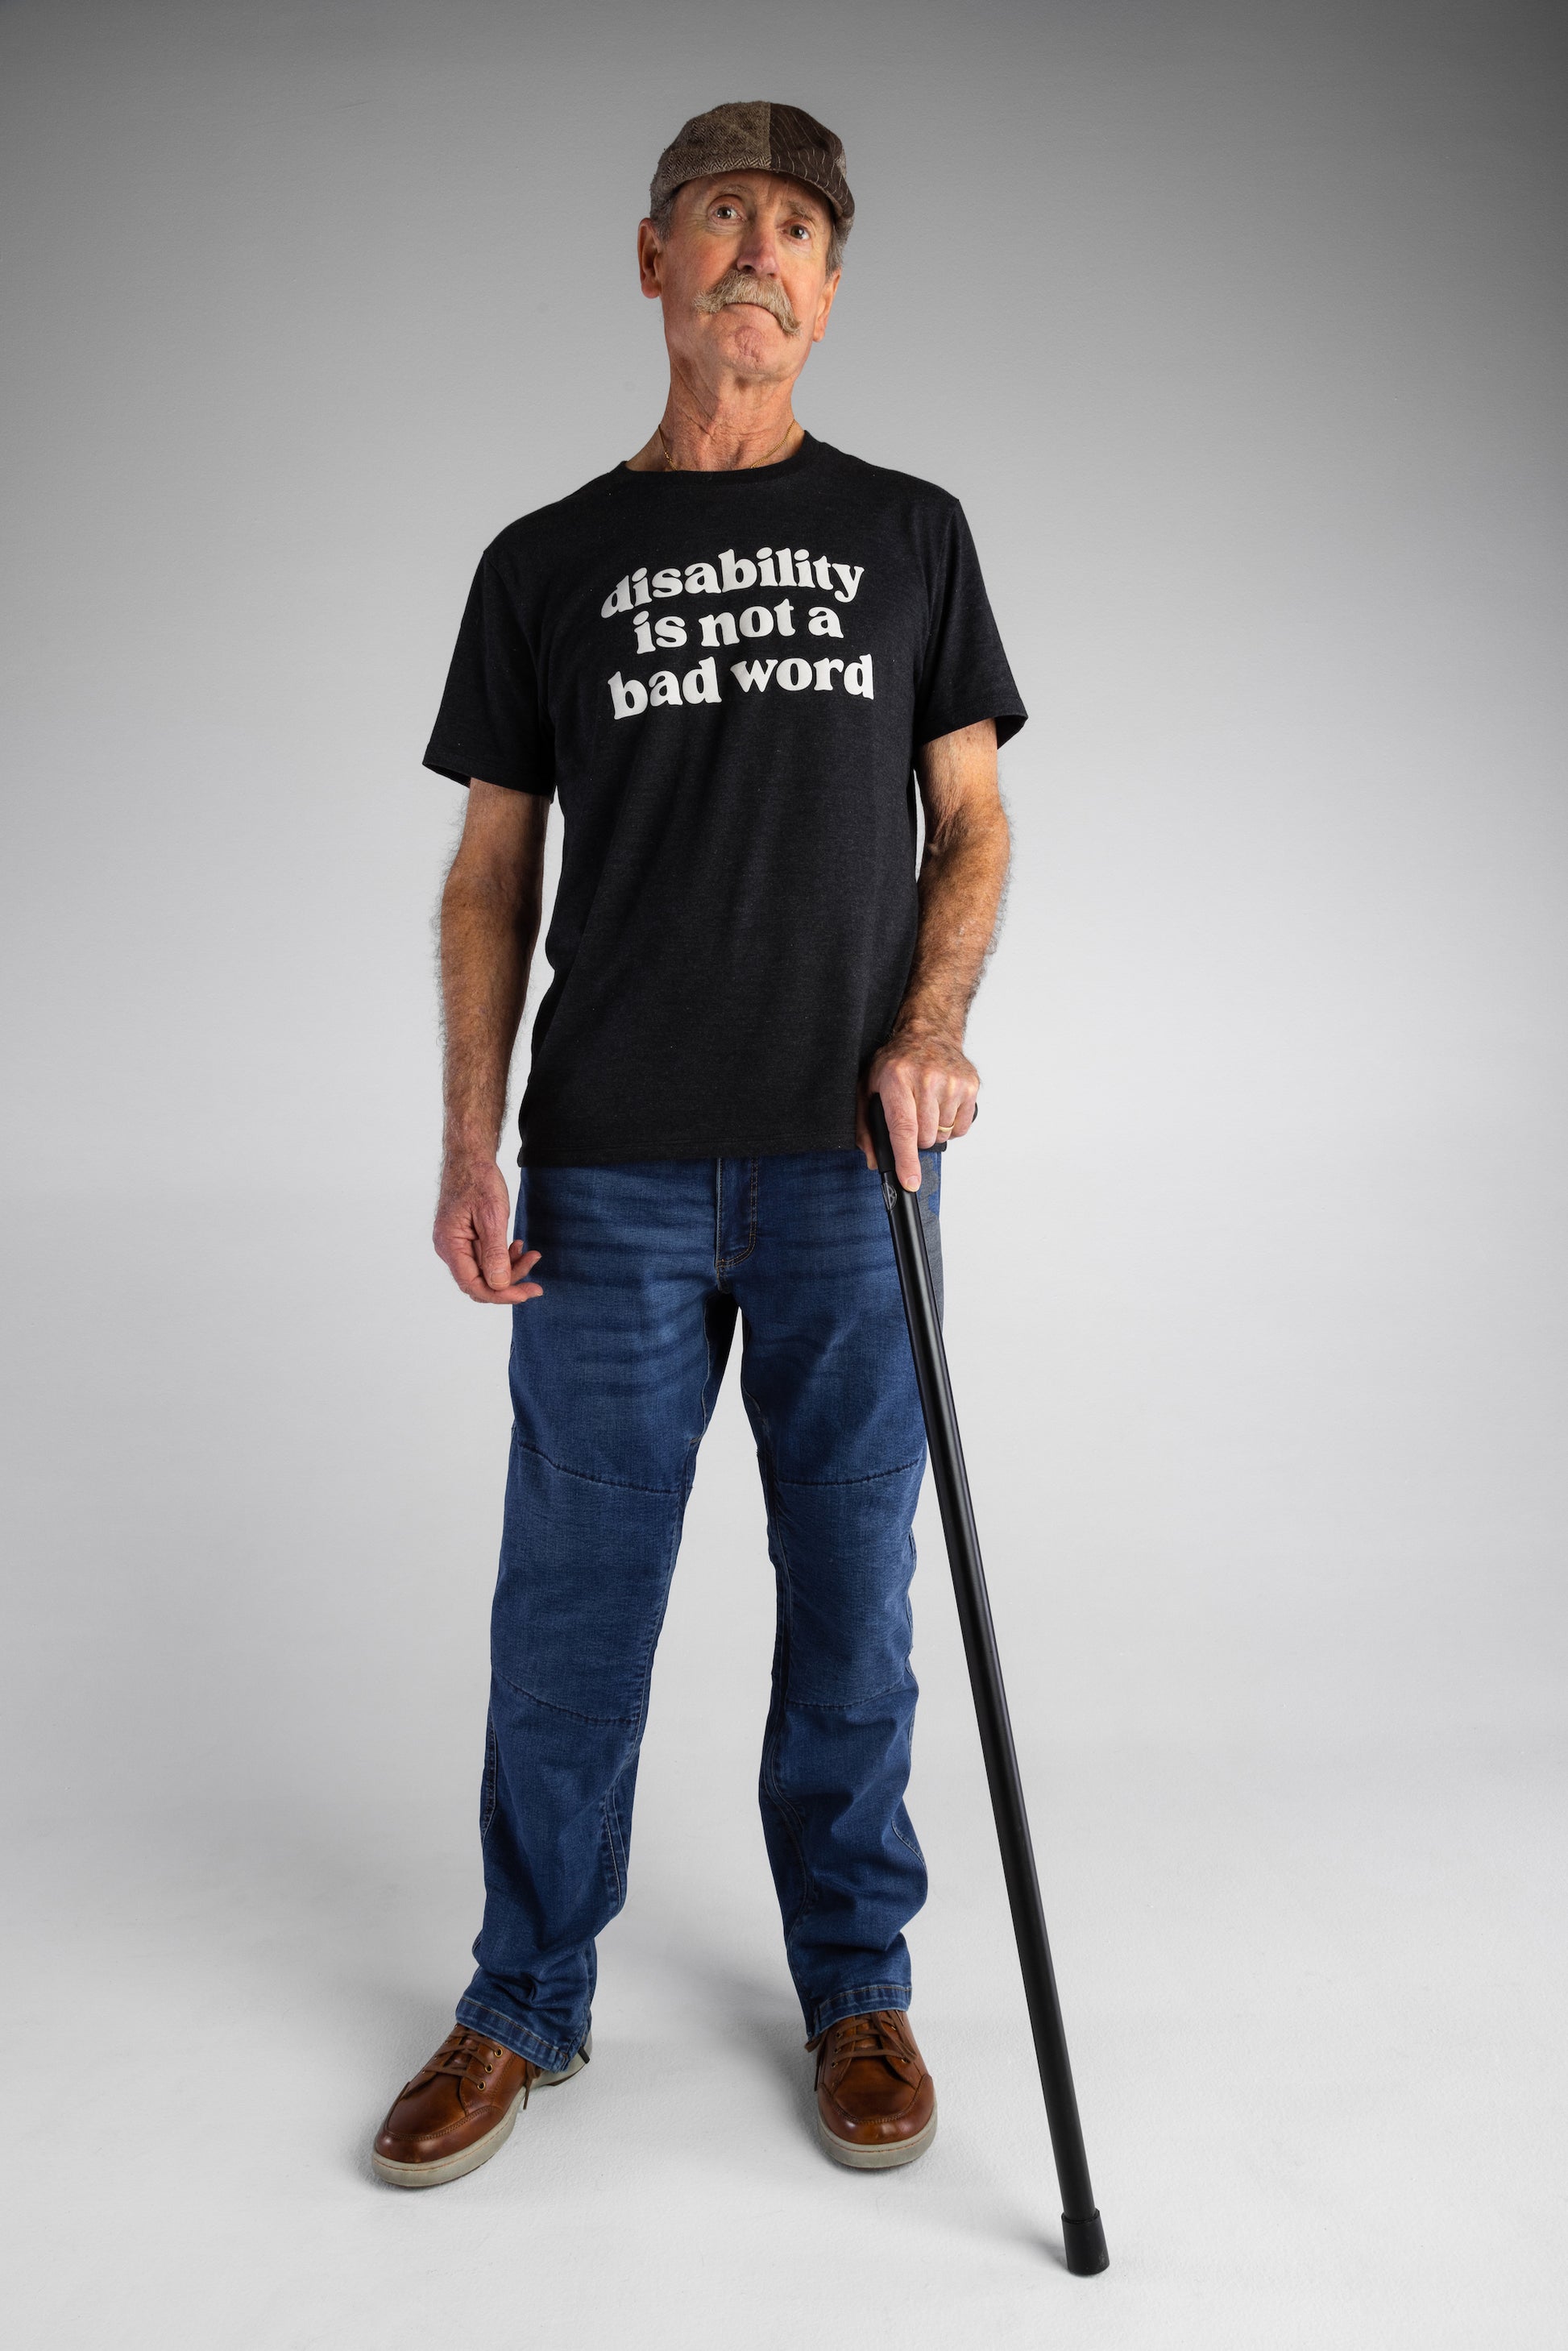 A old white man with a black cane wears navy t-shirt with cream text that says "disability is not a bad word."